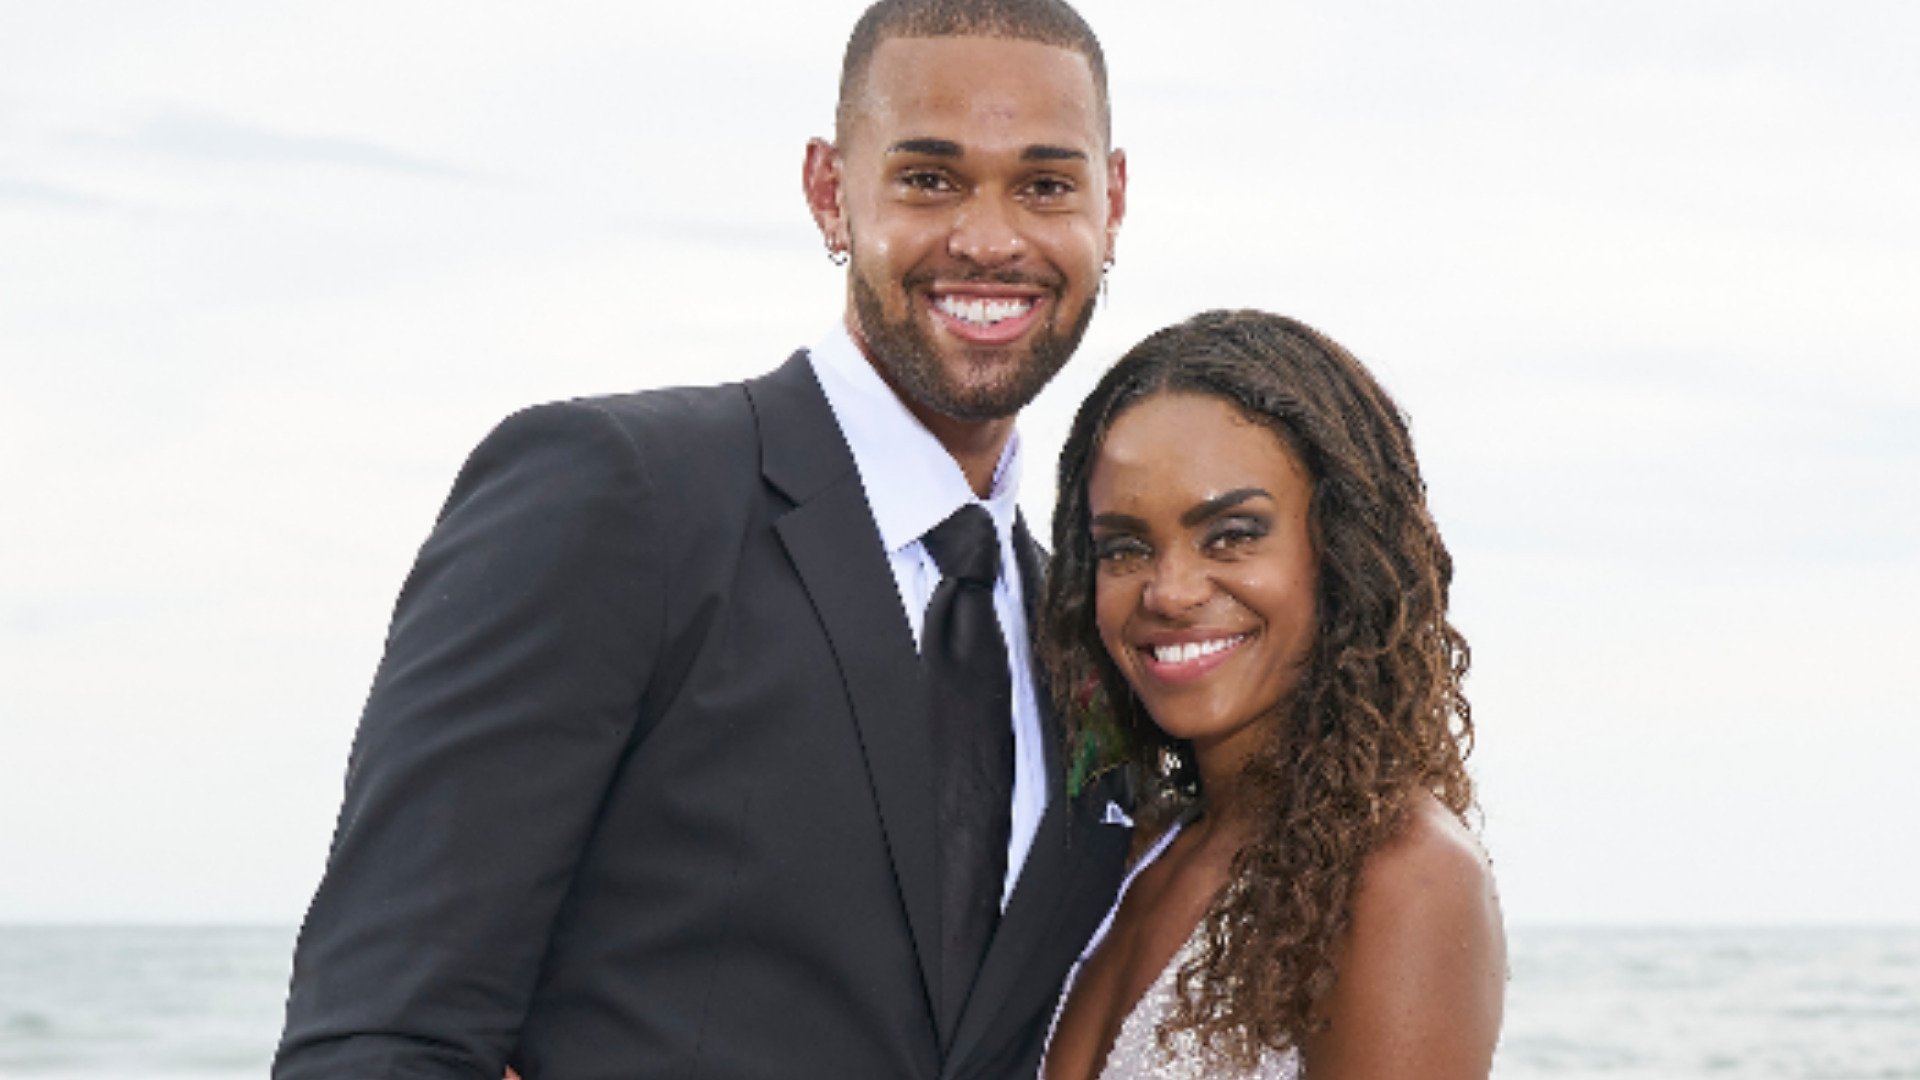 ‘The Bachelorette’: Nayte Olukoya and Michelle Young Update Fans on Their Engagement via Instagram